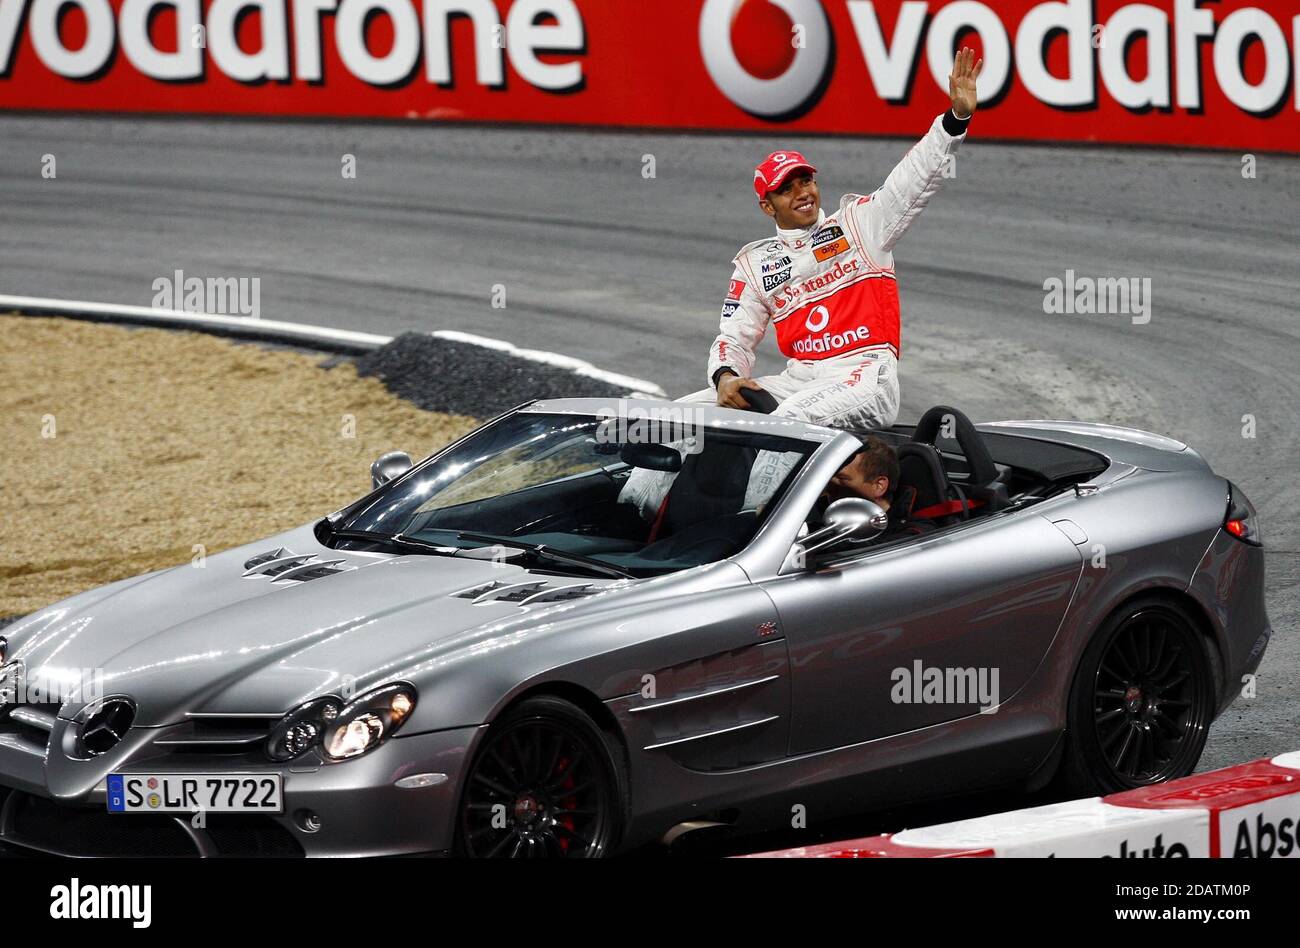 File photo dated 14-12-2008 of Lewis Hamilton on the track in a Mercedes SLR 7722 during the Race of Champions at Wembley Stadium, London. Stock Photo